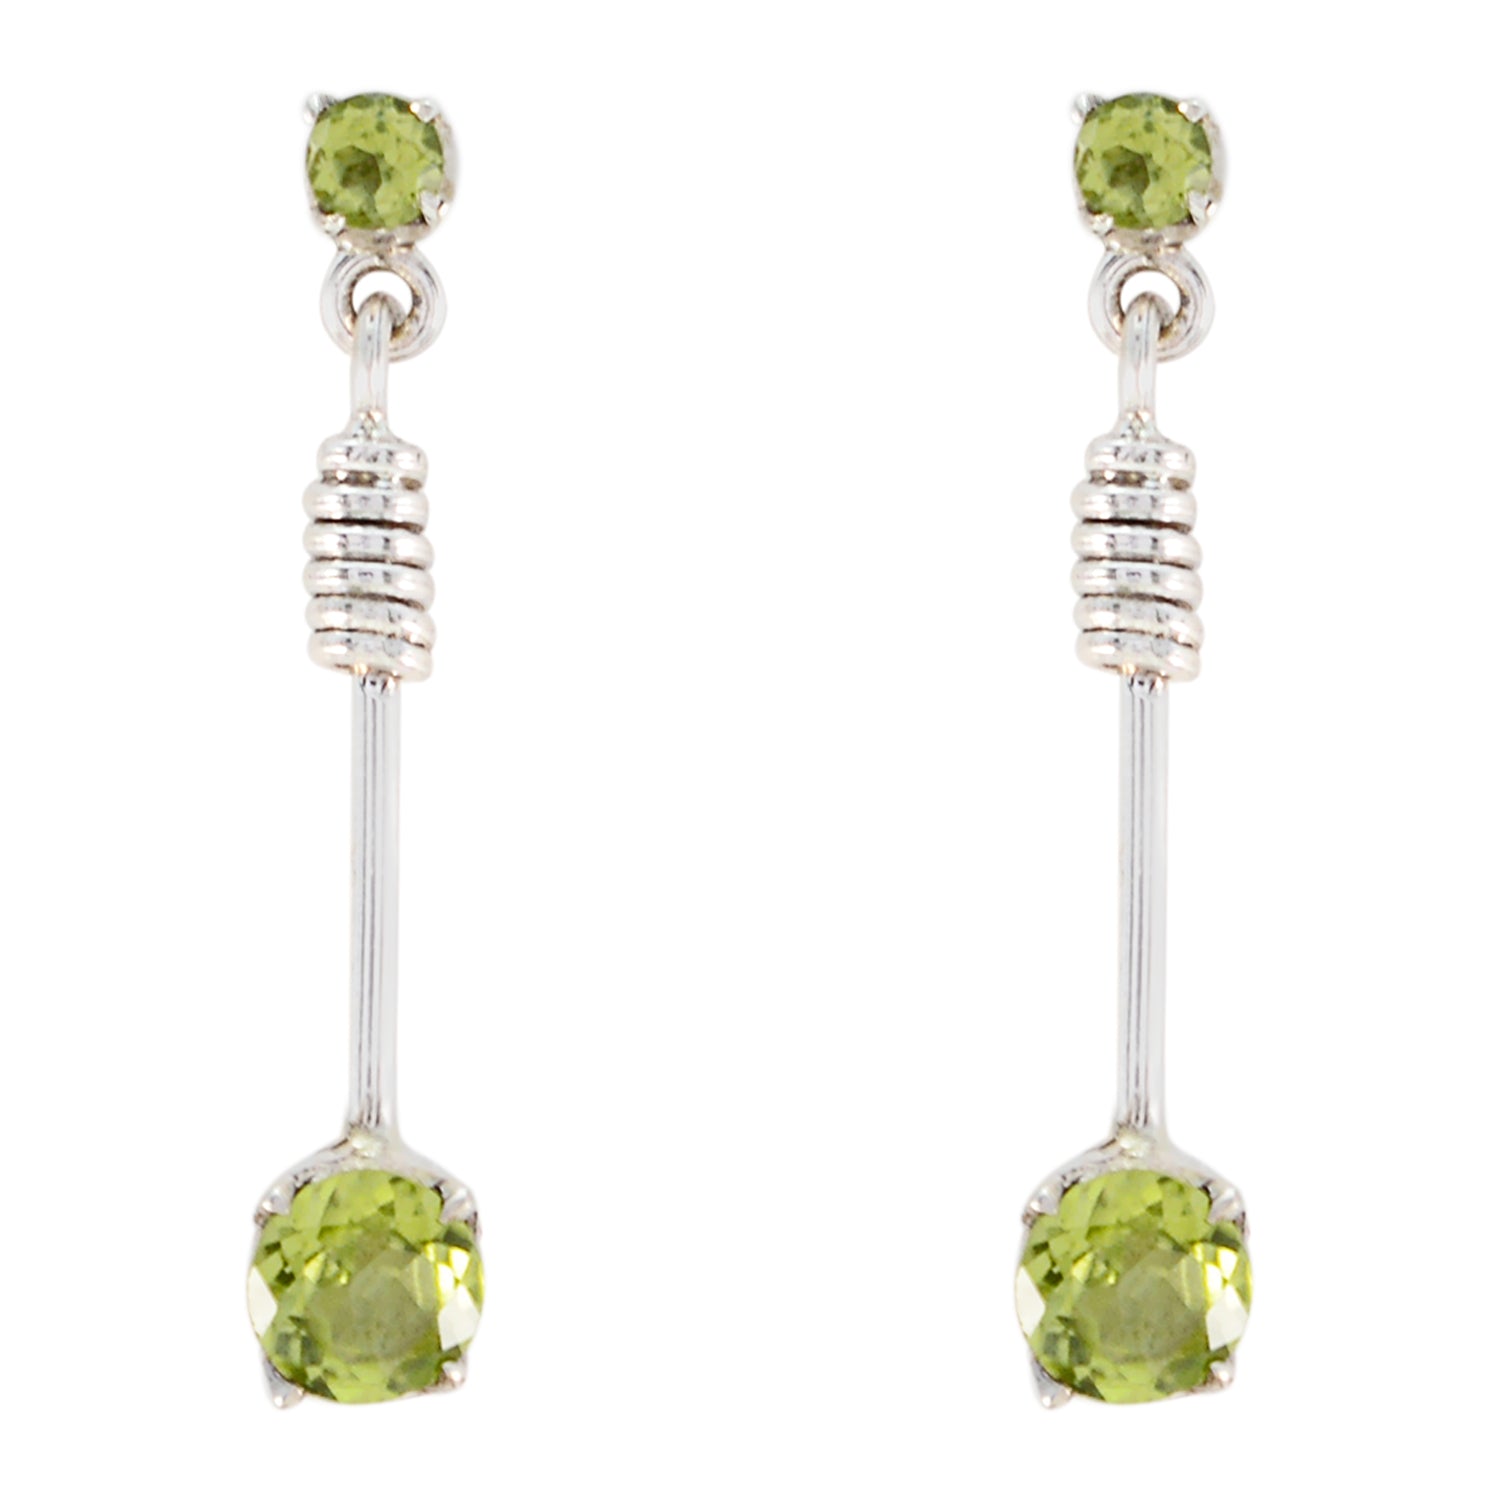 Riyo Good Gemstones round Faceted Green Peridot Silver Earring gift for black Friday